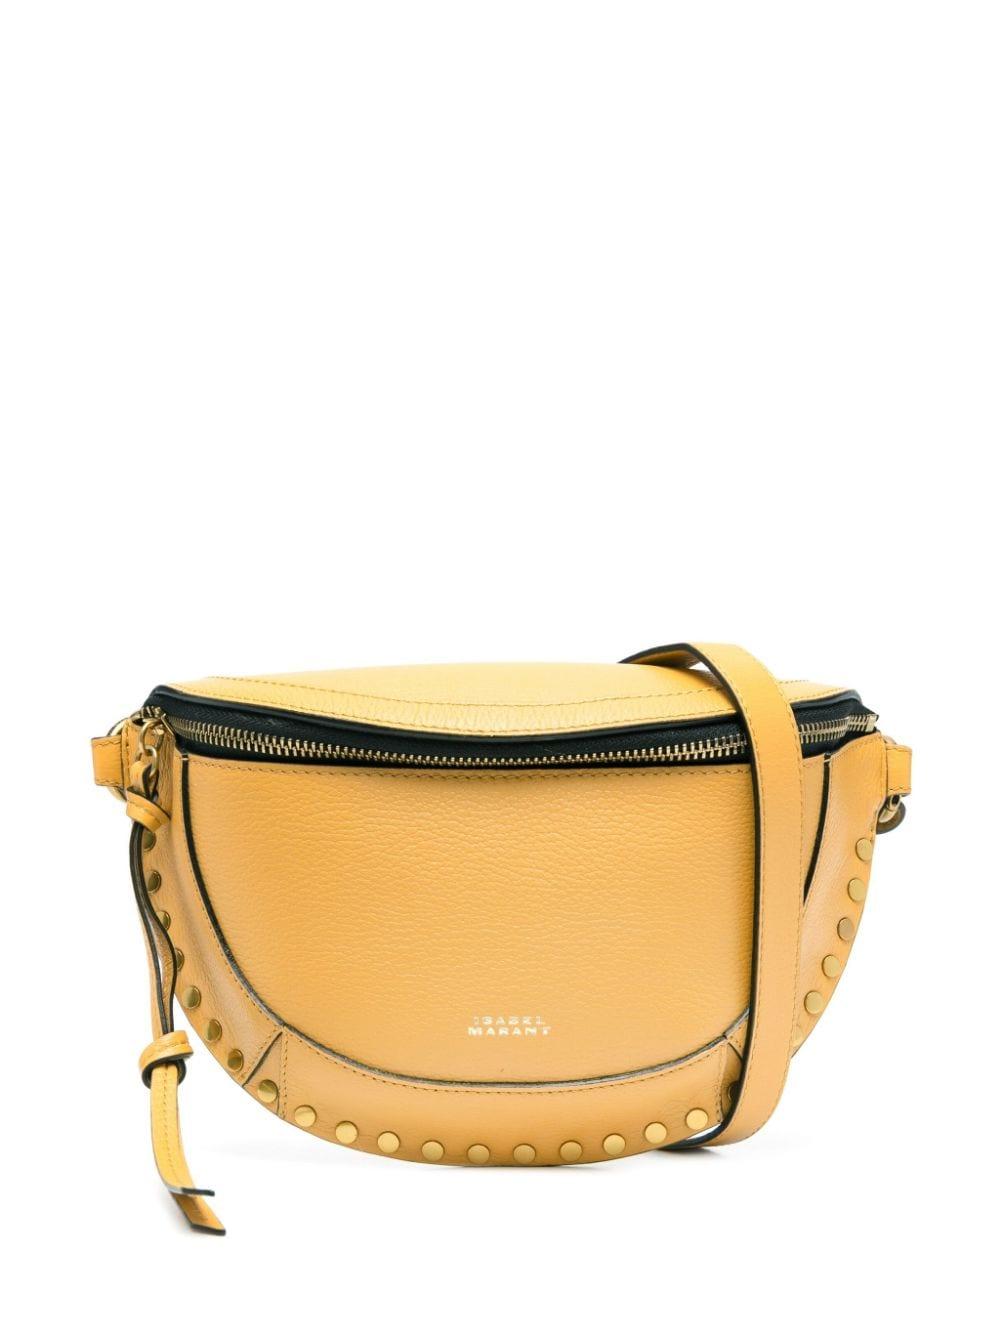 Isabel Marant Skano Leather Crossbody Bag in Natural | Lyst